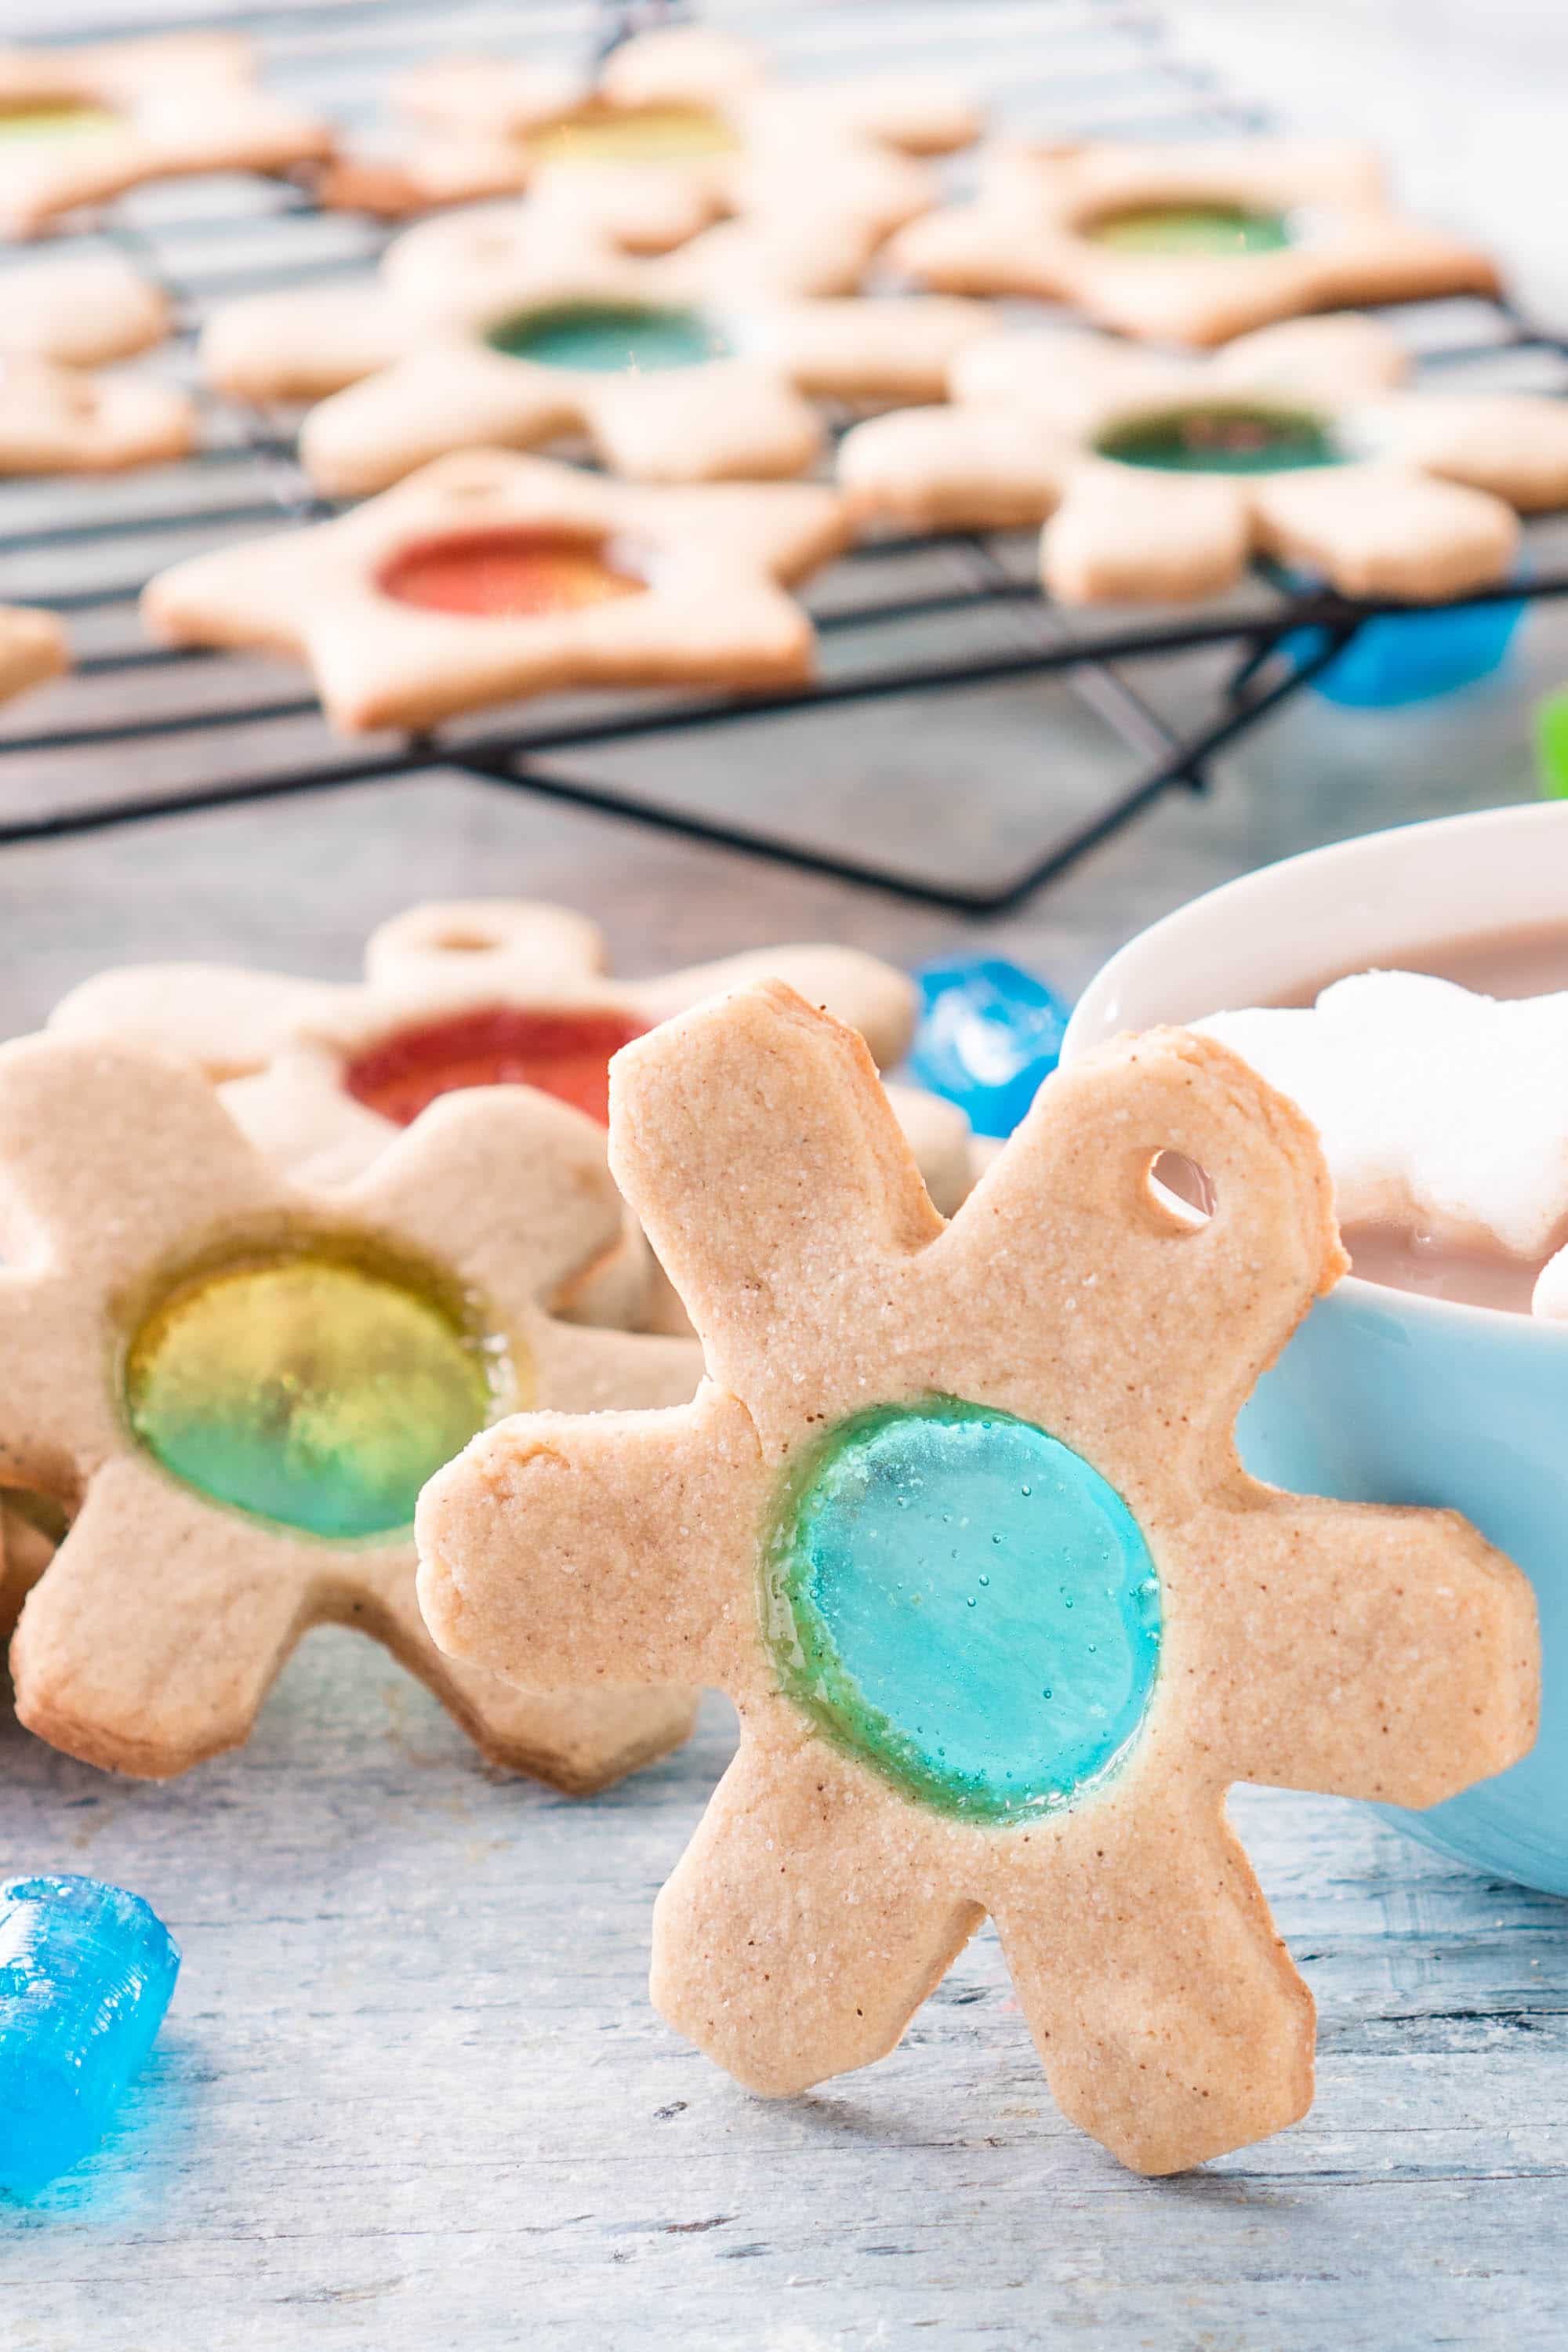 Stained Glass Cookies Recipe with Jolly Ranchers - Eating Richly